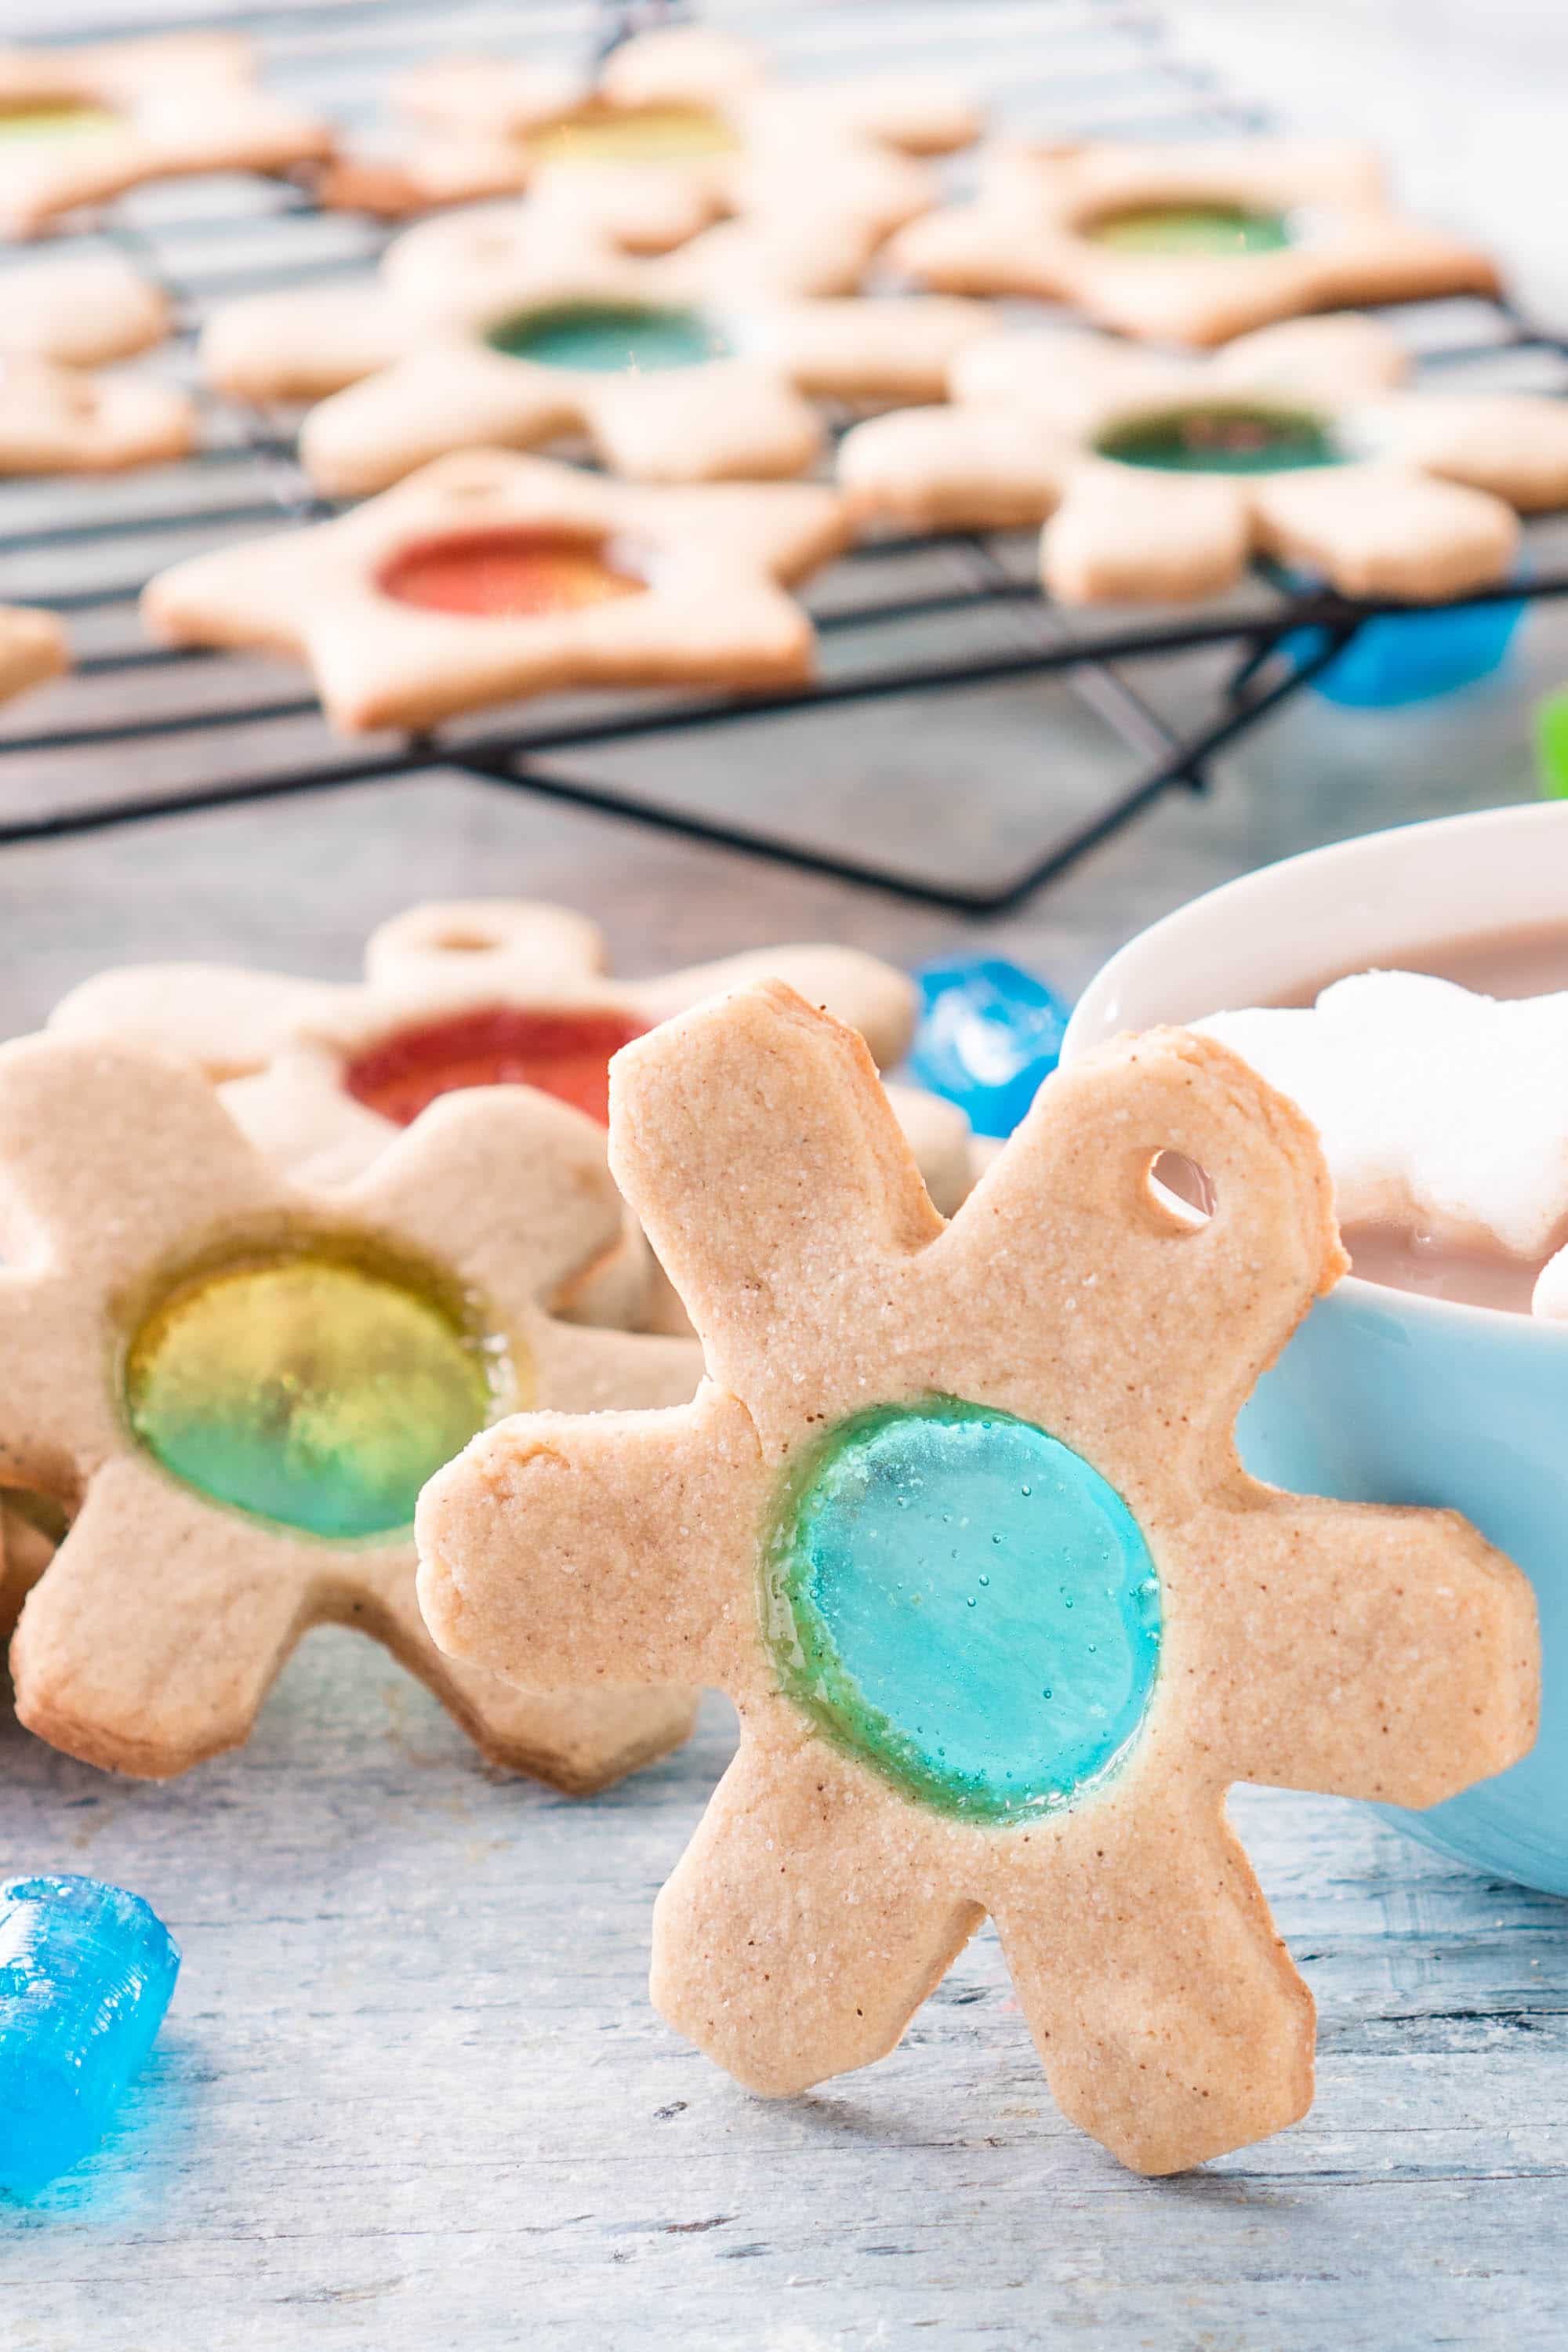 Stained Glass Cookies Recipe with Jolly Ranchers - Eating Richly